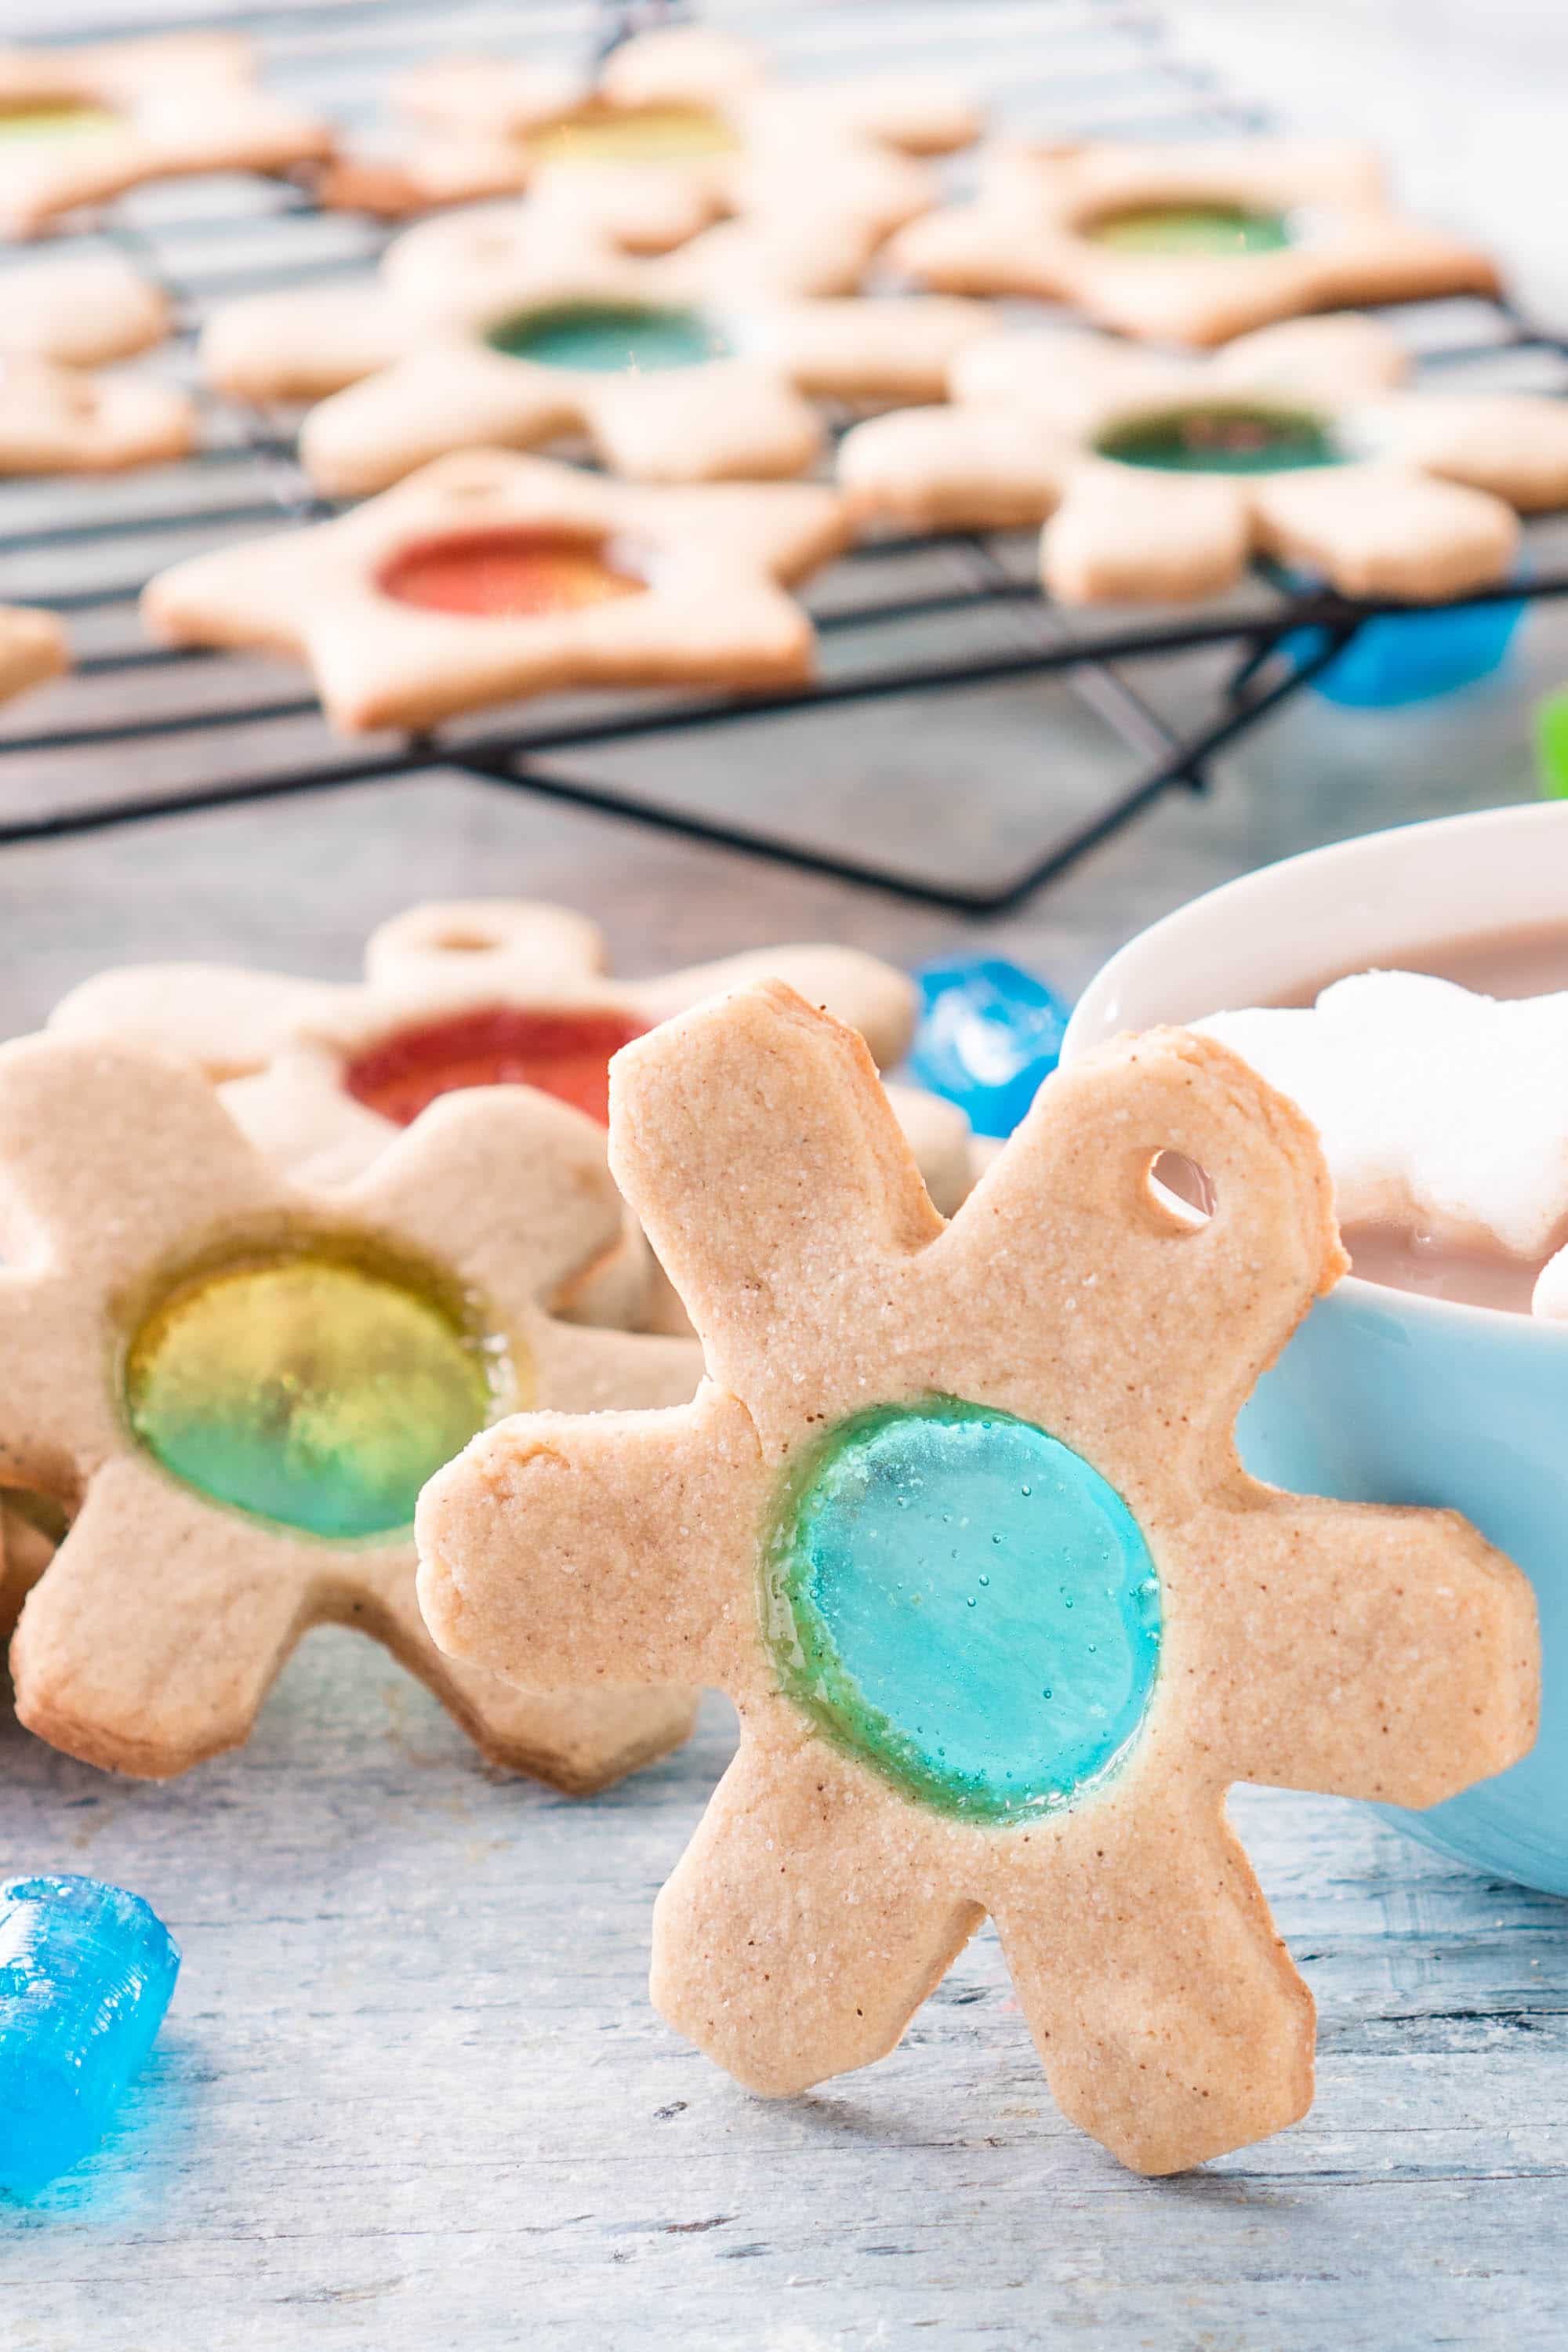 Stained Glass Cookies Recipe with Jolly Ranchers - Eating Richly